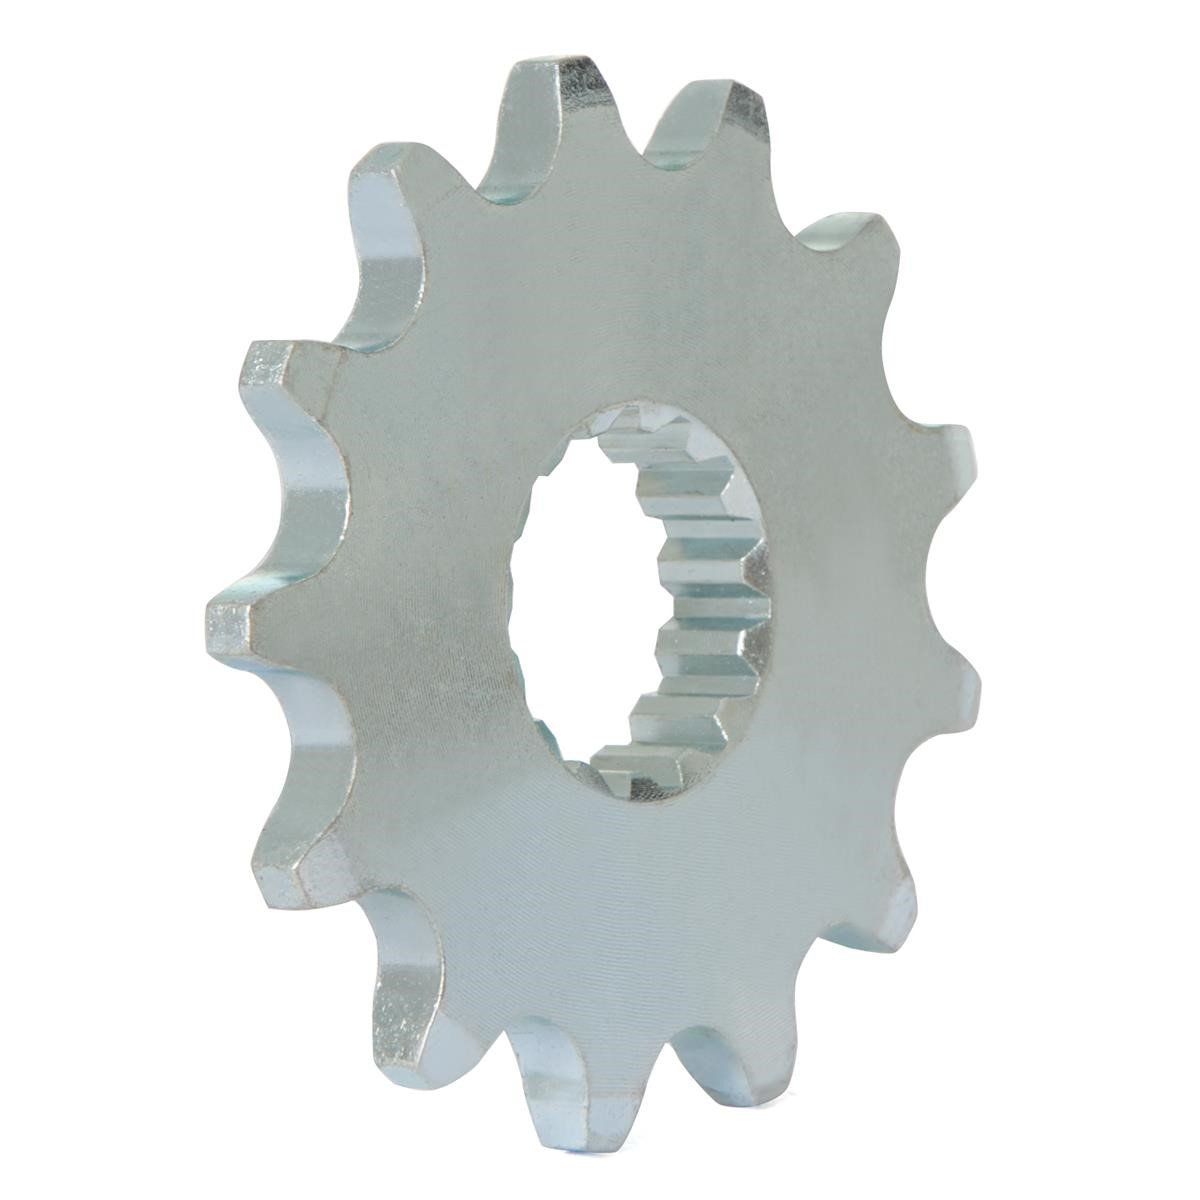 RFX FRONT SPROCKET 13T TEETH TOOTH FOR BETA RR 125 250 300 350 450 2007-2019 